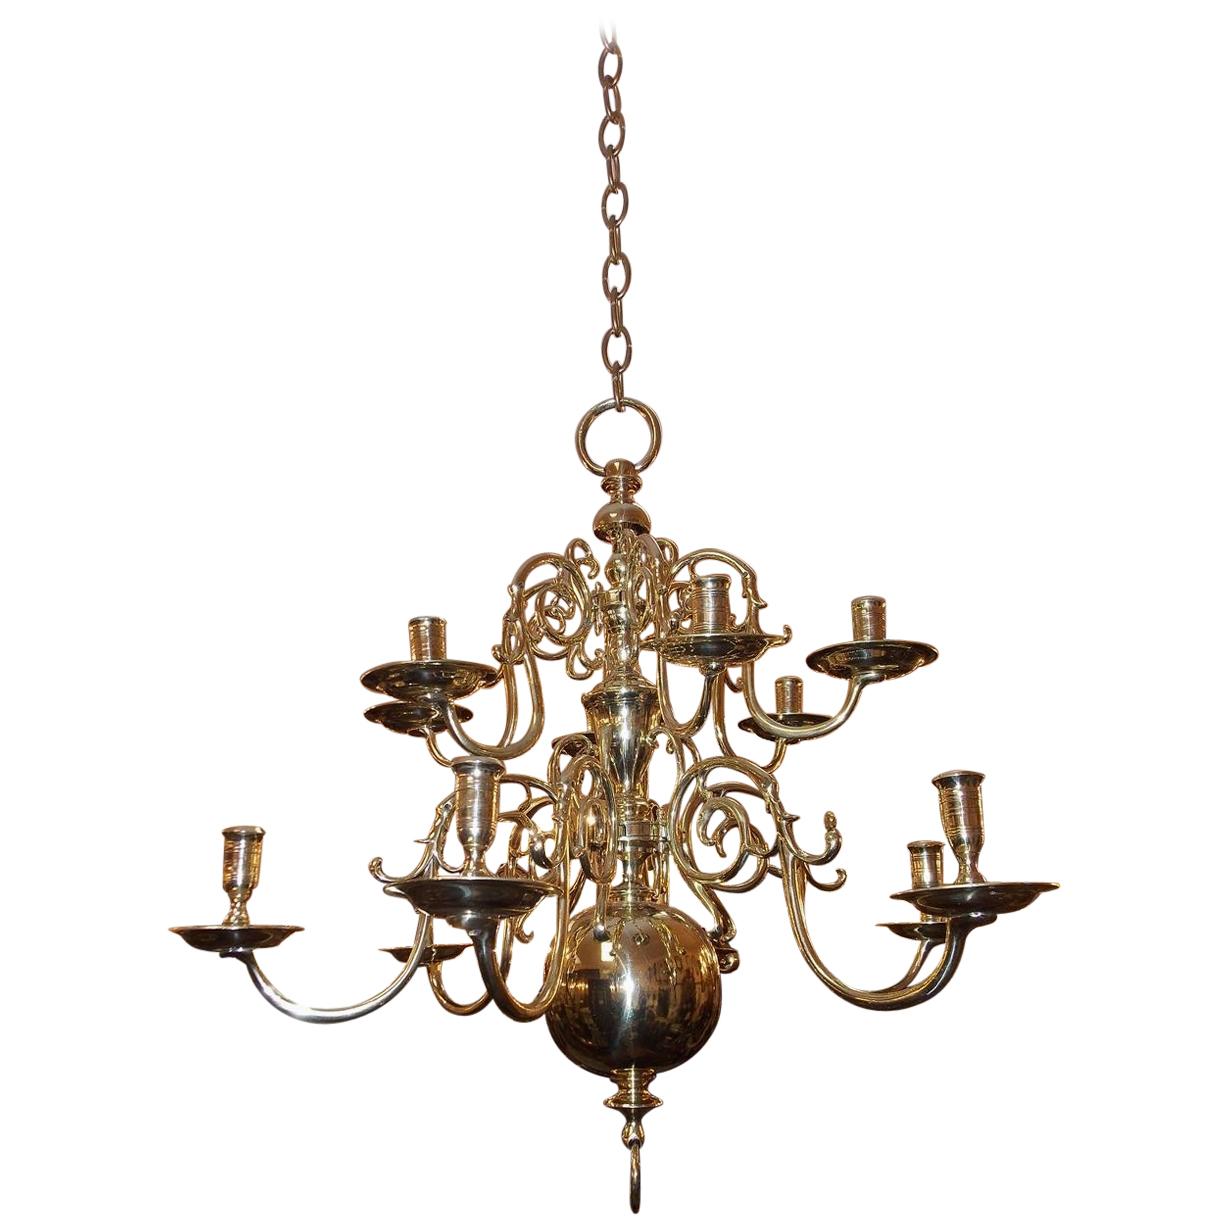 Dutch Colonial Brass Two-Tier Bulbous and Scrolled Chandelier, Circa 1760 For Sale